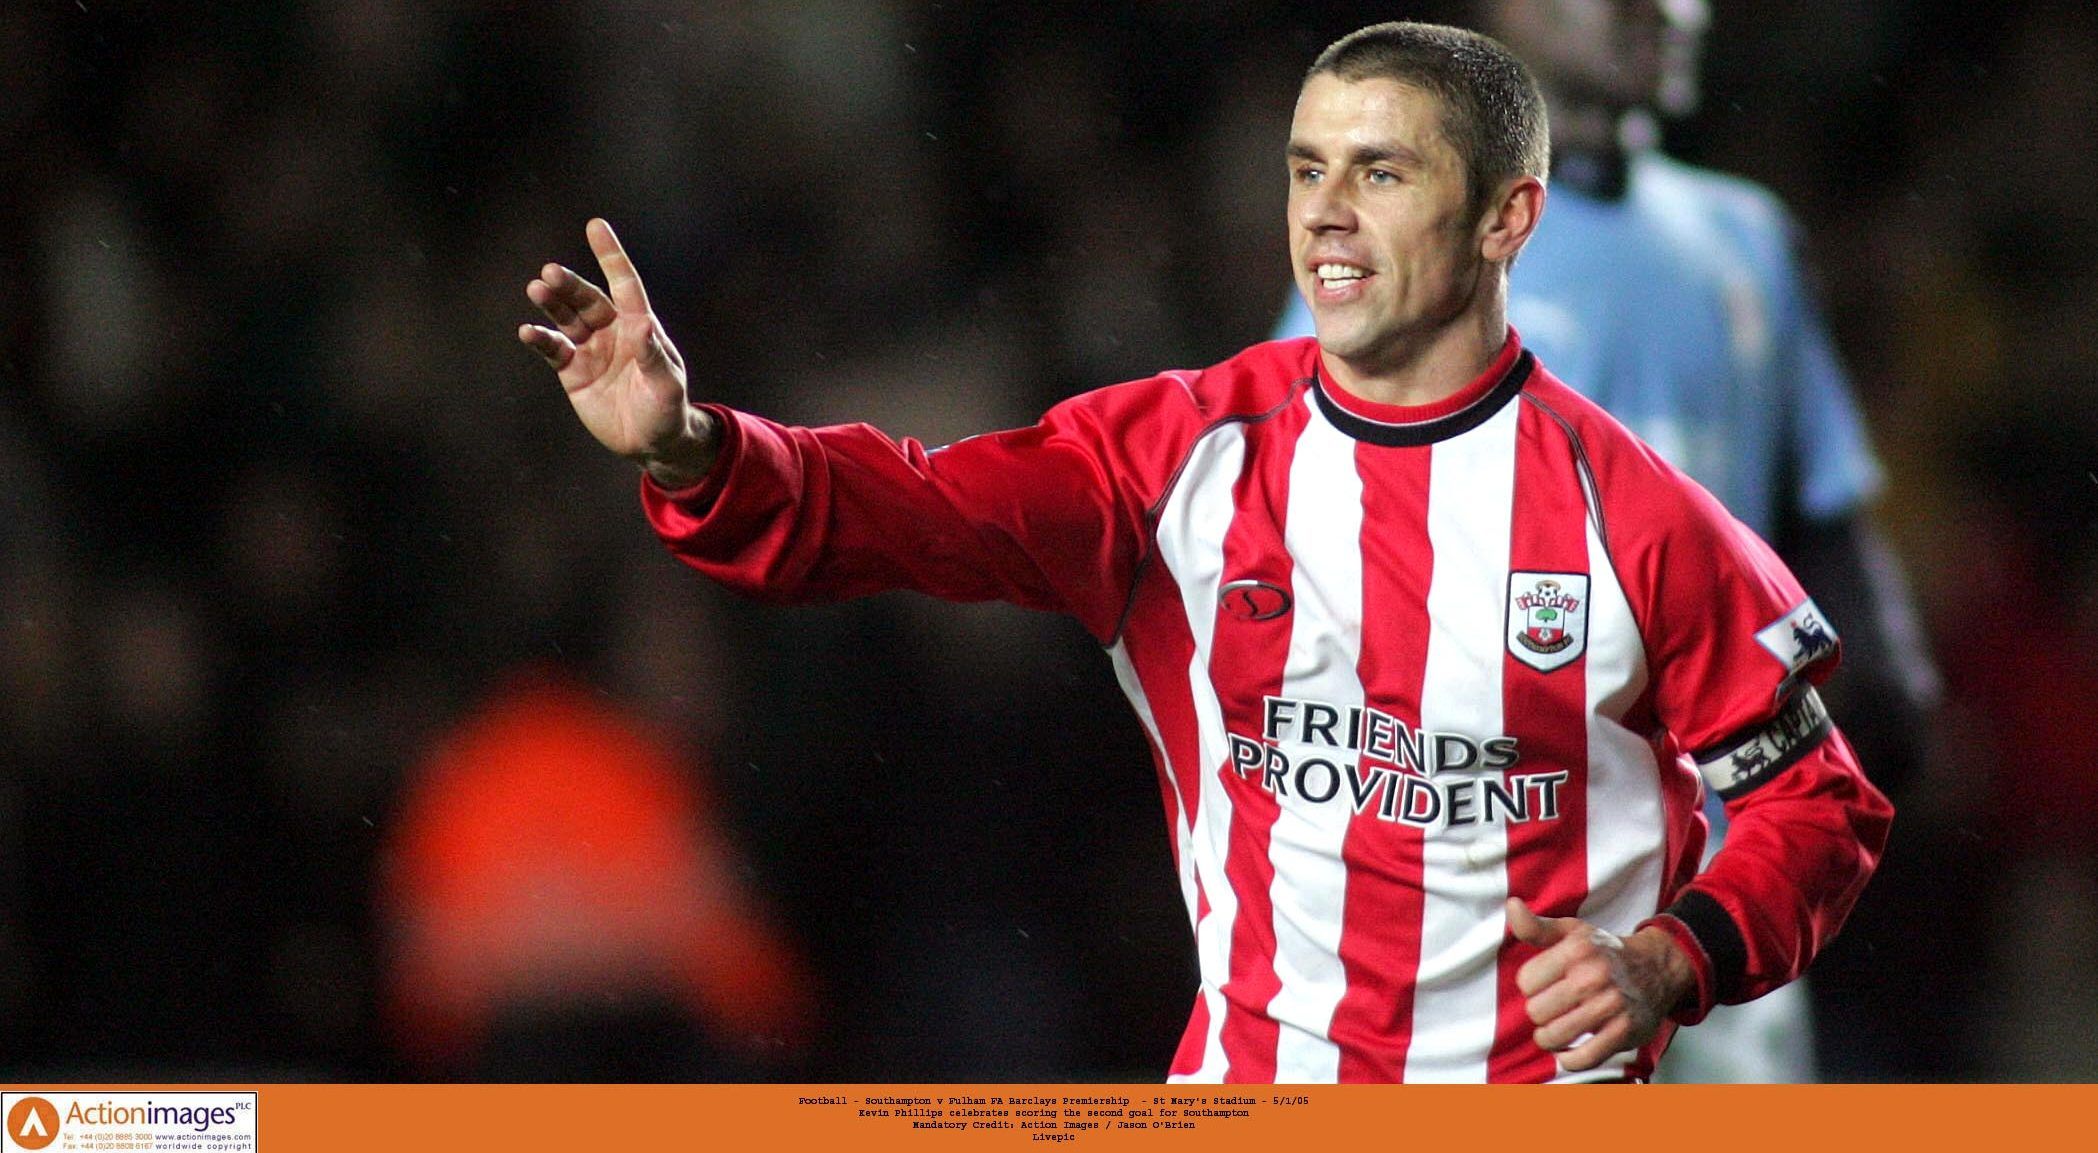 Football - Southampton v Fulham FA Barclays Premiership  - St Mary's Stadium - 5/1/05 
Kevin Phillips celebrates scoring the second goal for Southampton 
Mandatory Credit: Action Images / Jason O'Brien 
Livepic 
NO ONLINE/INTERNET USE WITHOUT A LICENCE FROM THE FOOTBALL DATA CO LTD. FOR LICENCE ENQUIRIES PLEASE TELEPHONE +44 207 298 1656.